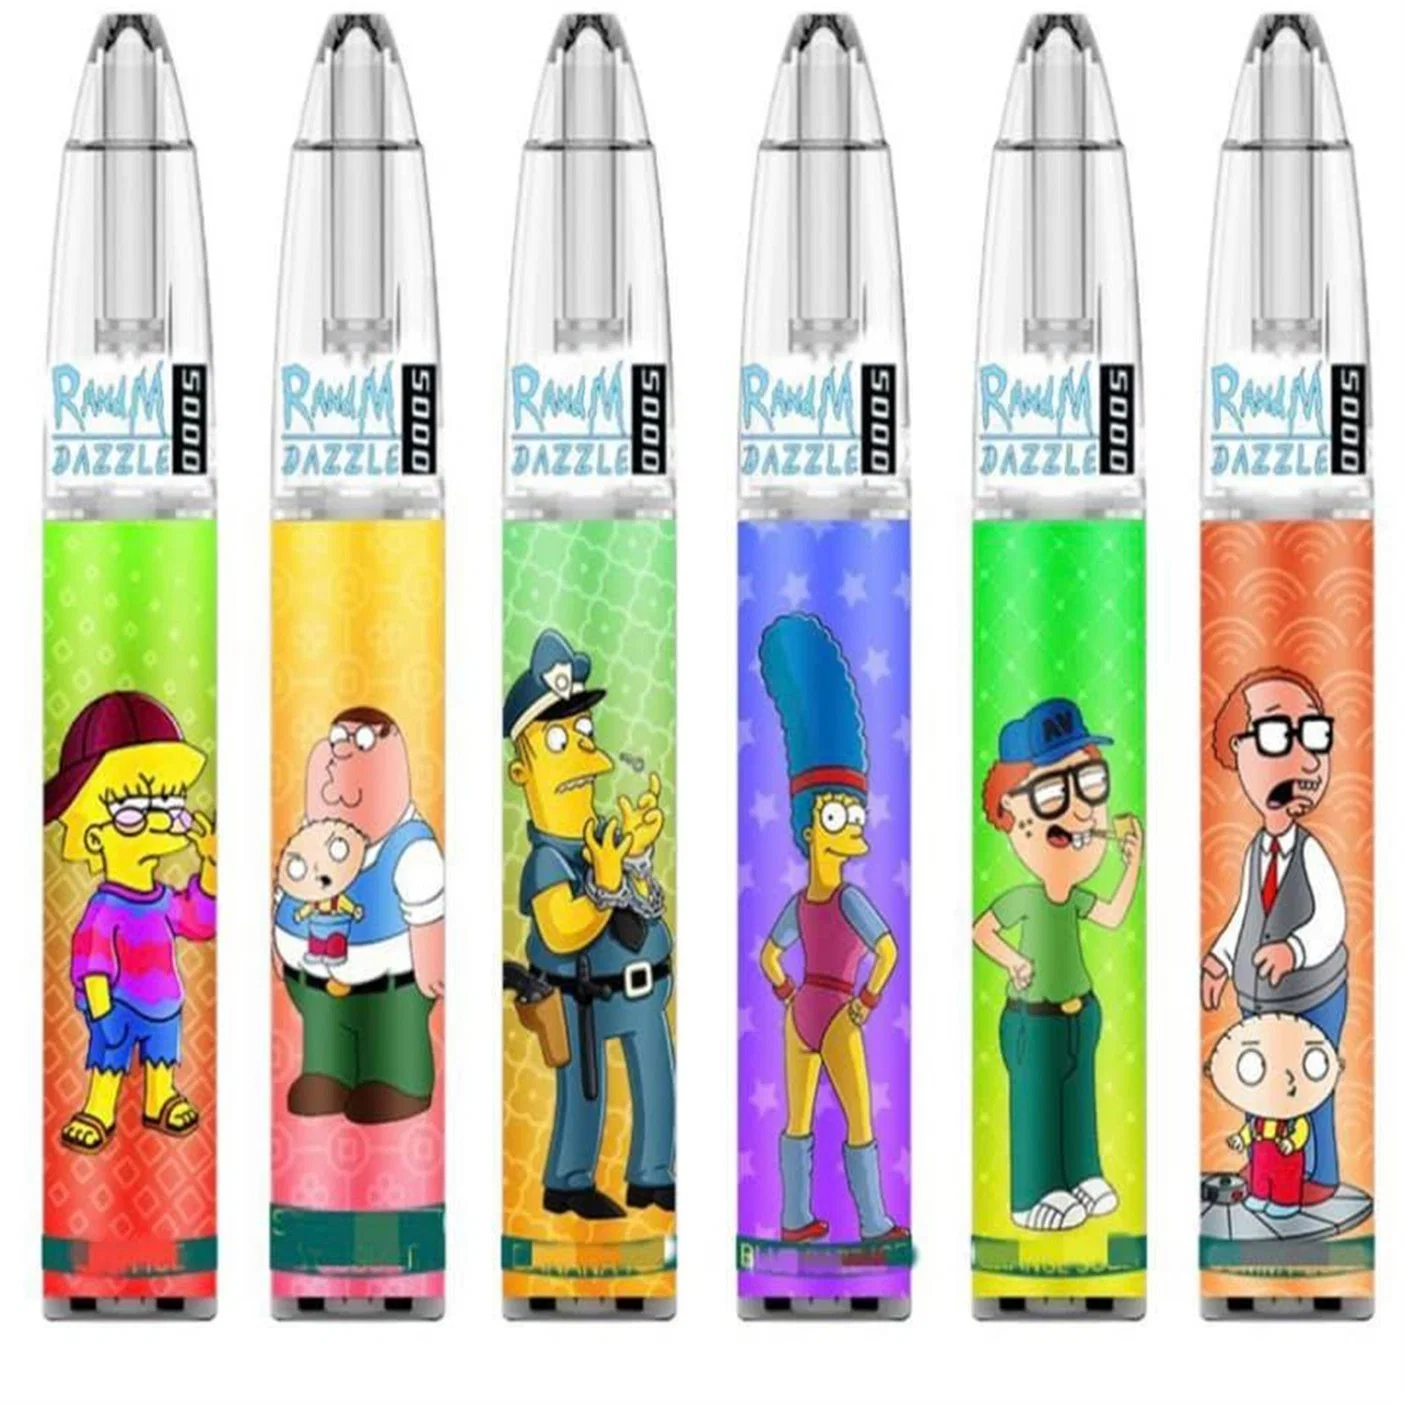 2022 New Randm Dazzle 5000 Puffs Disposable/Chargeable Pod Device Kit vape Rechargeable Battery Prefilled 10ml Cartridge Vape Pen Authentic Vs Air Max Puff Bars